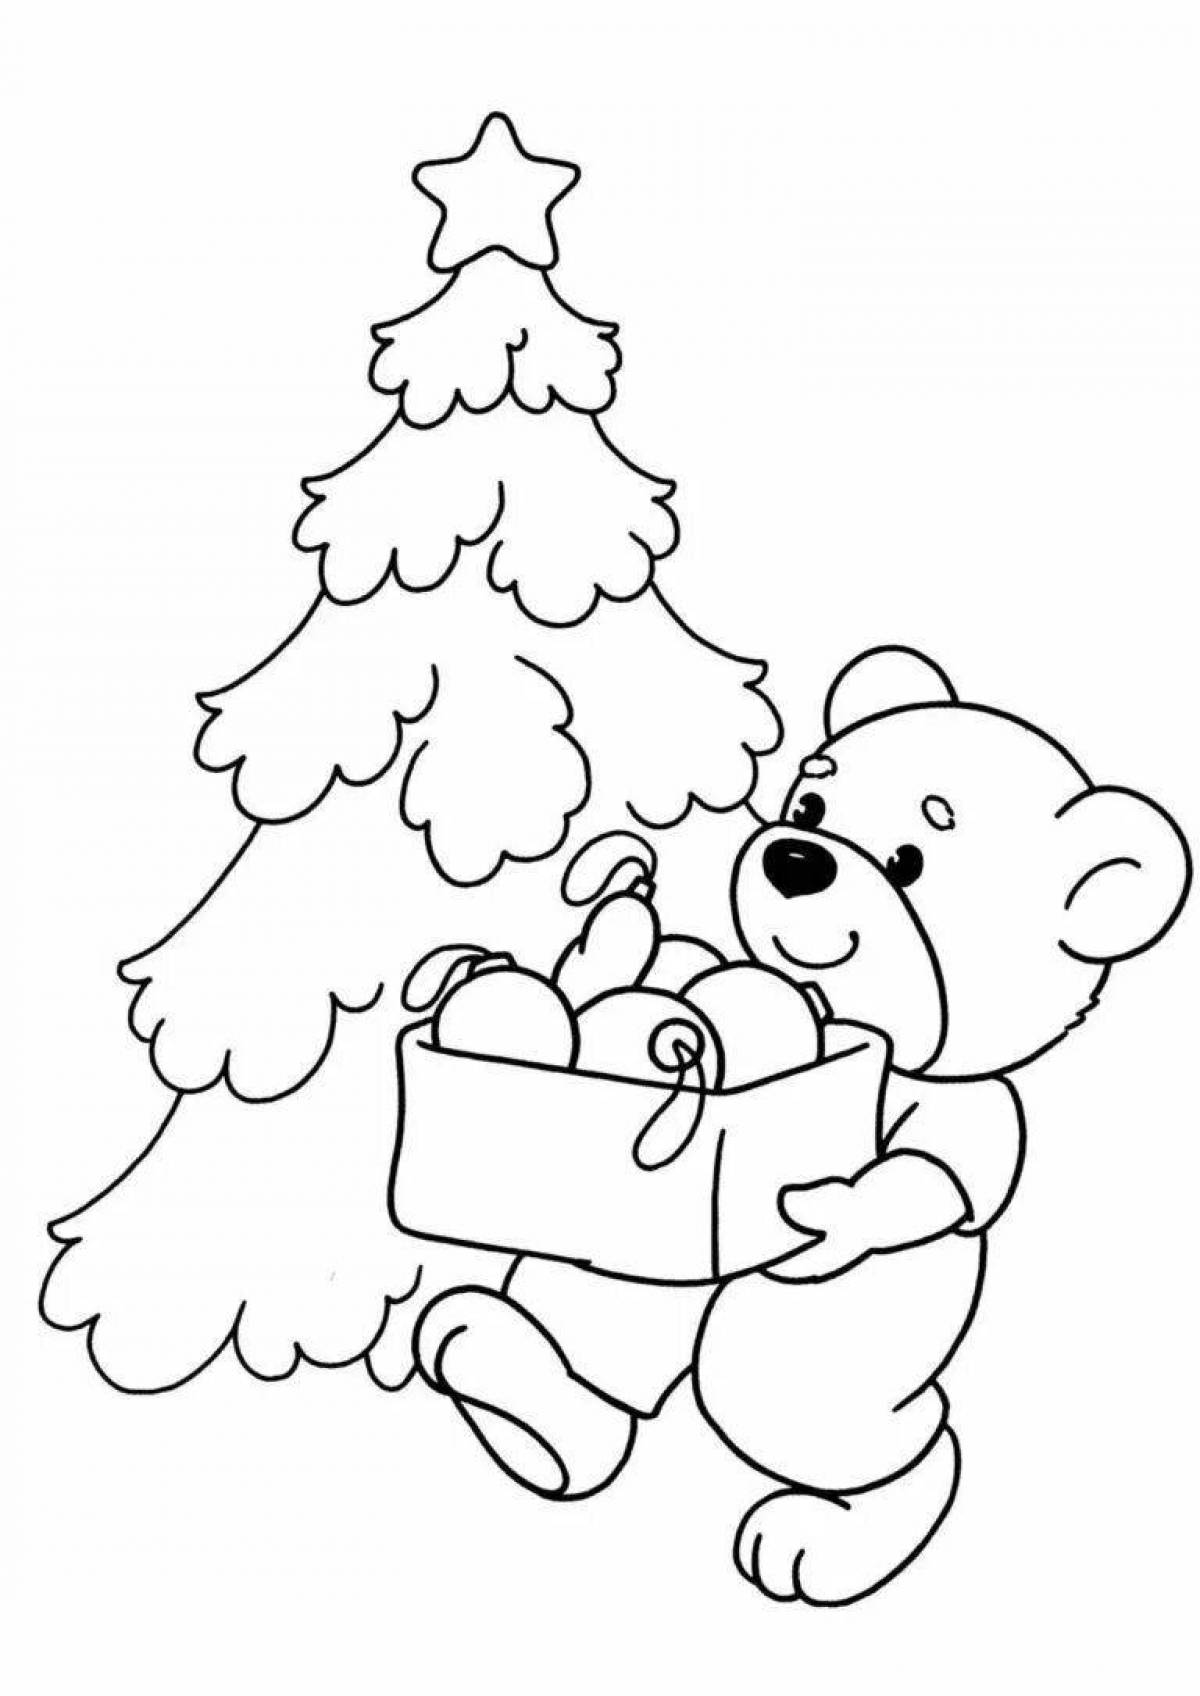 Majestic Christmas coloring book